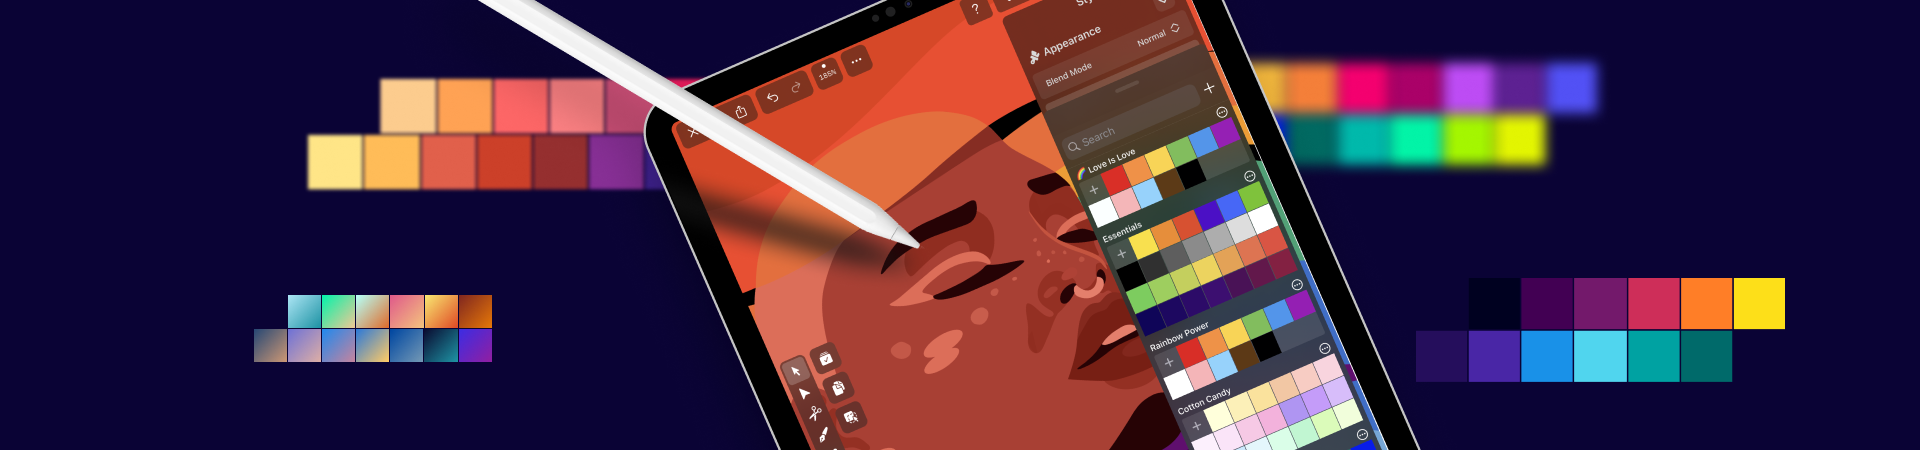 Digital tablet with stylus and color palettes